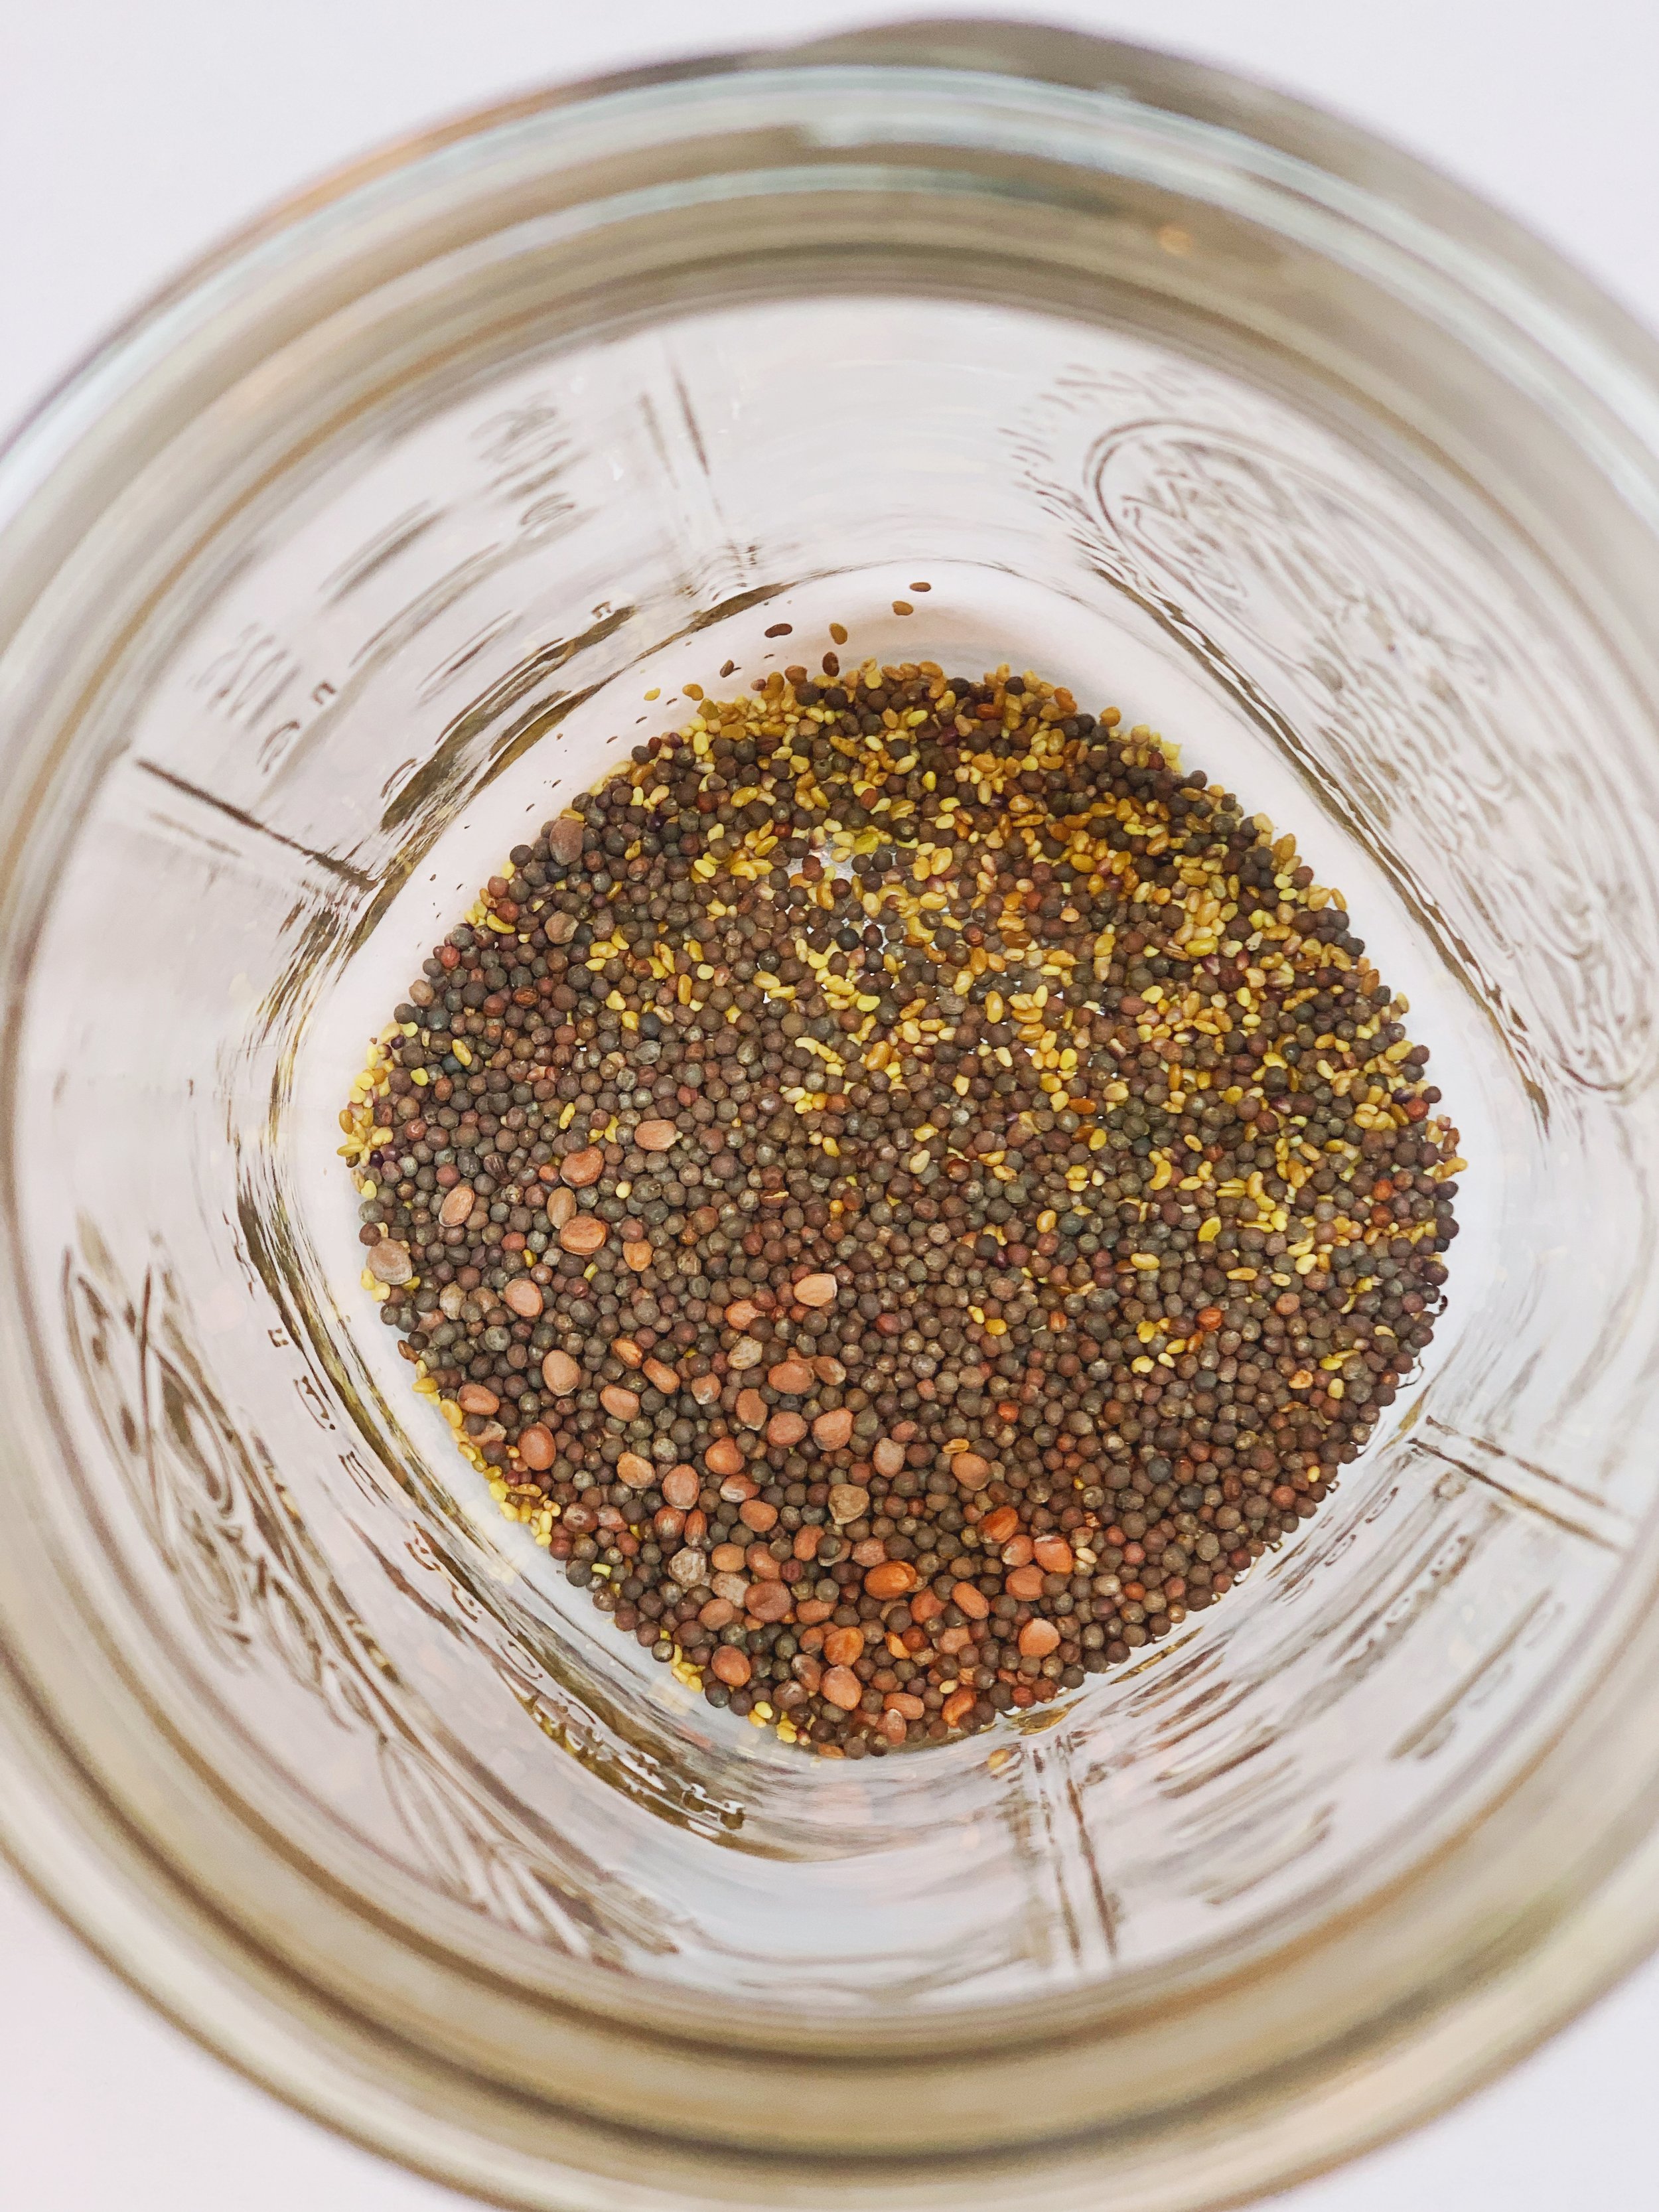 Dry sprouting seeds in jar